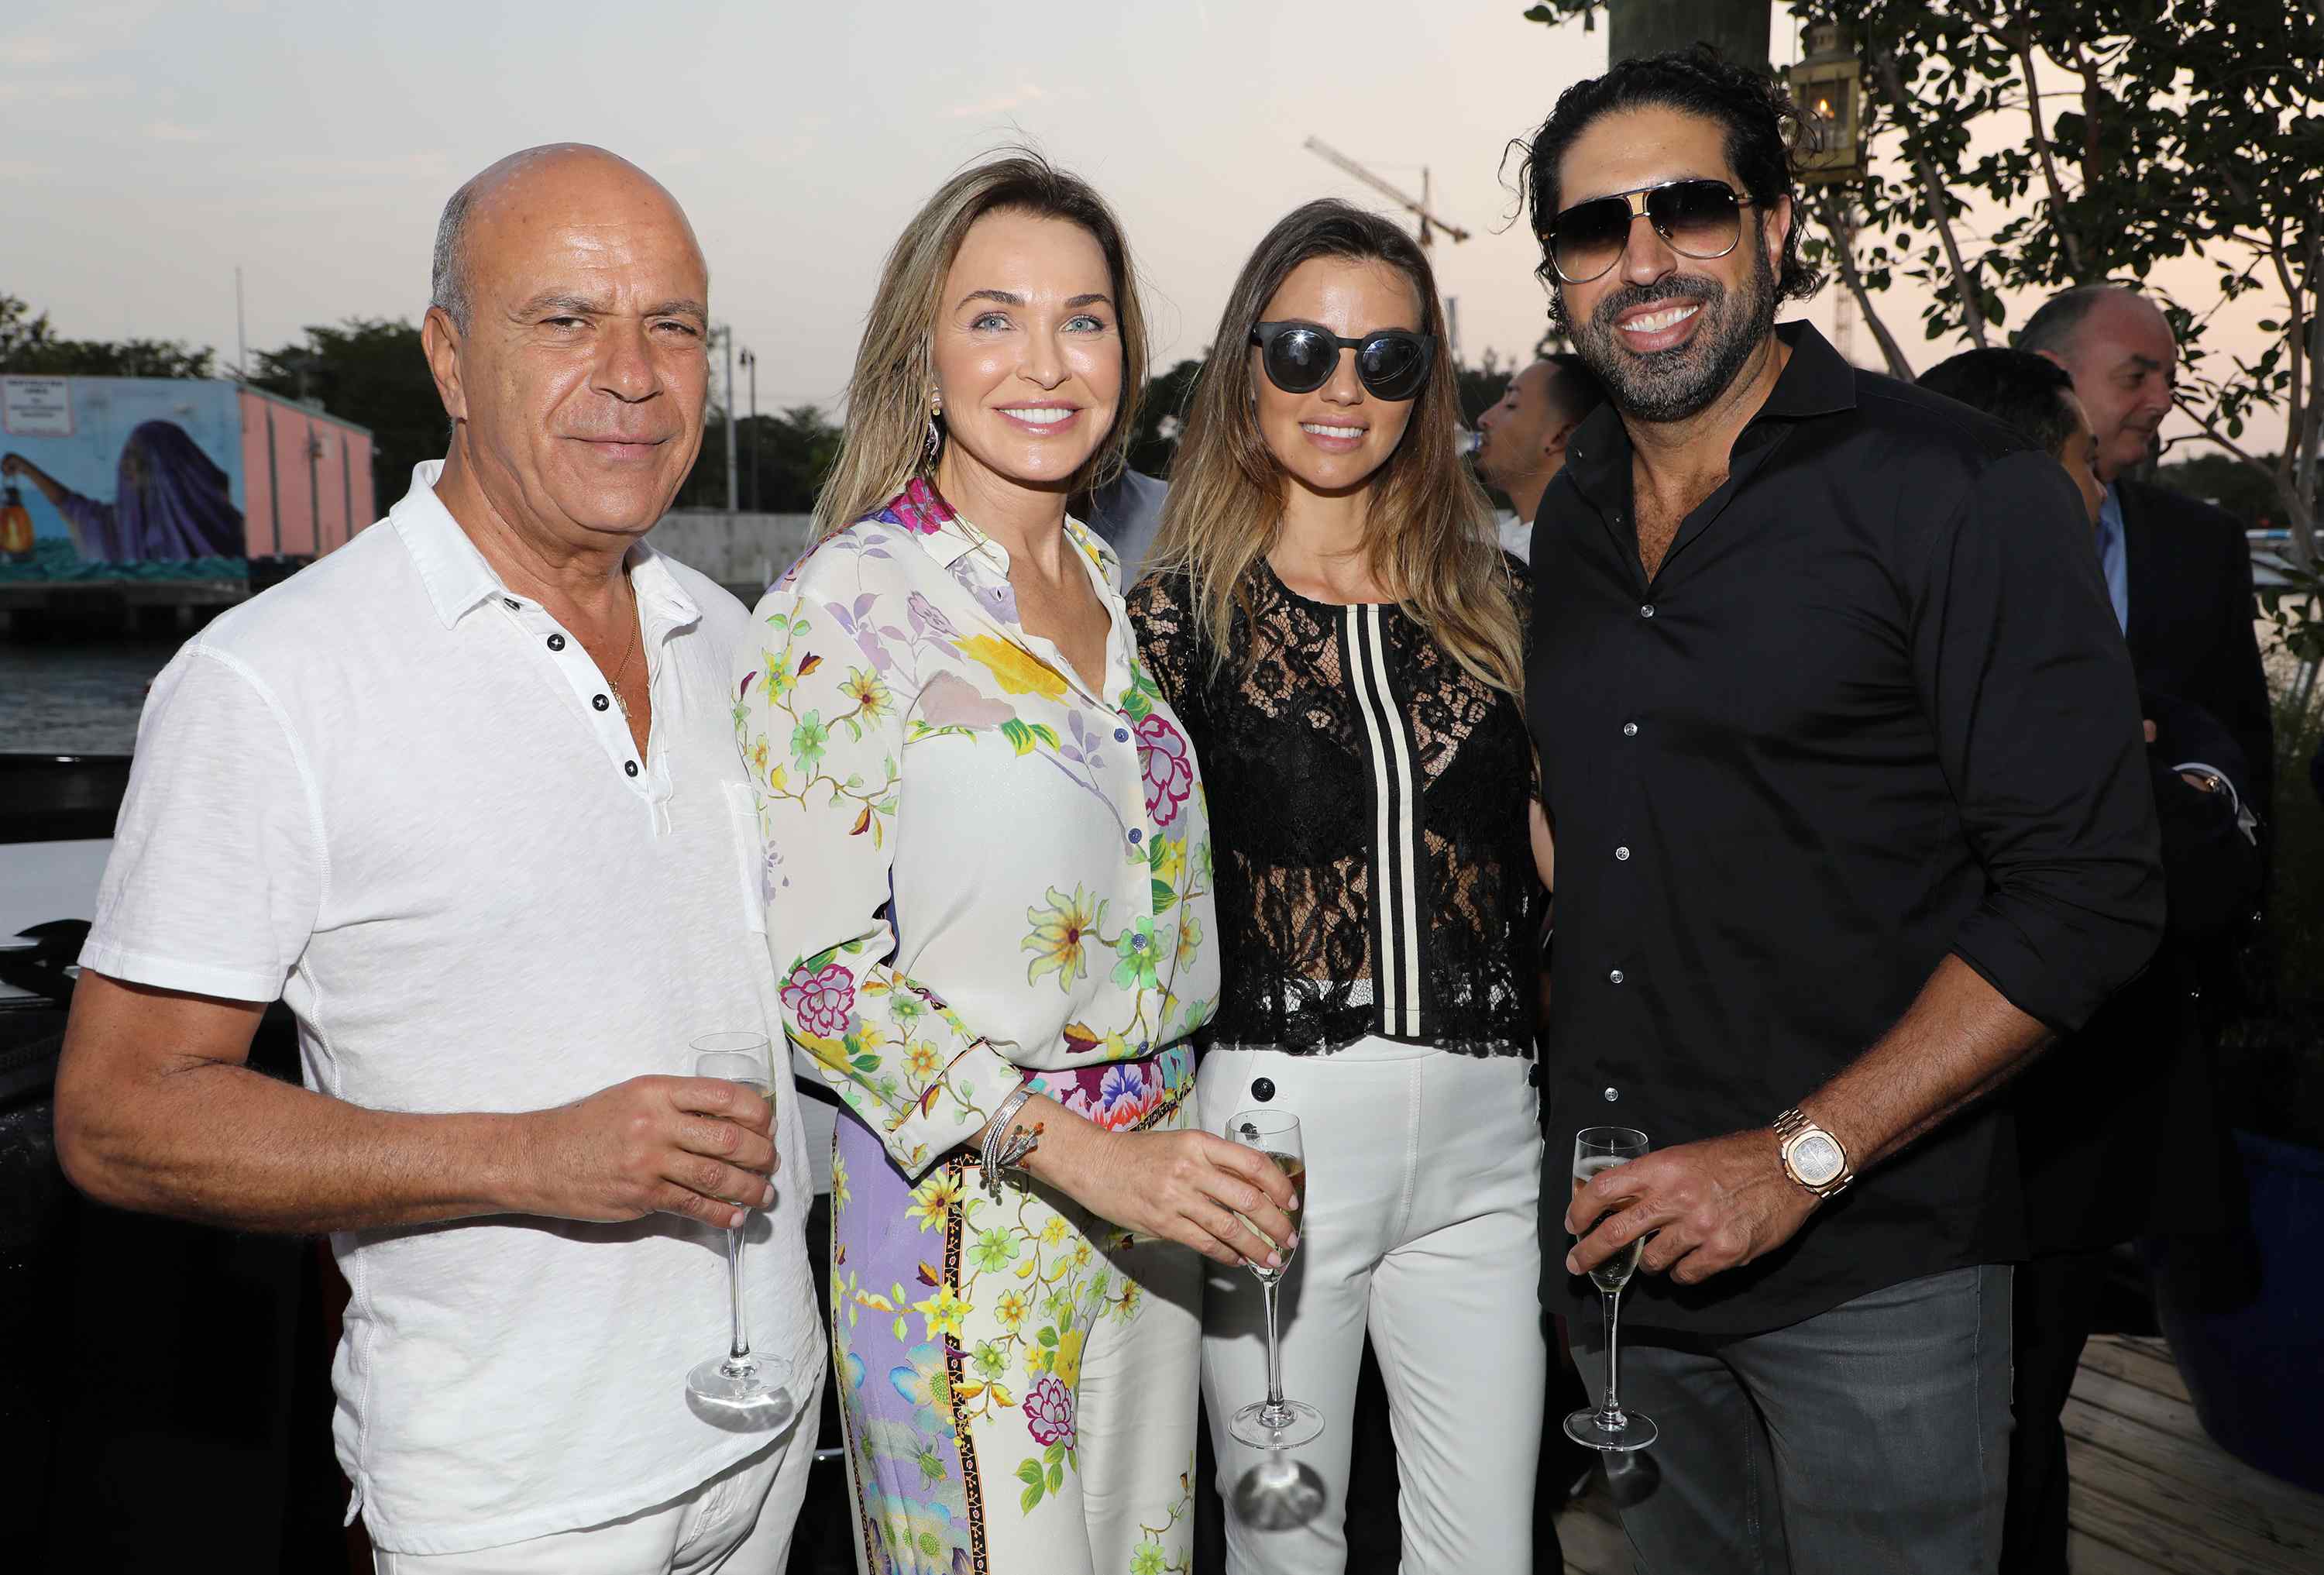 MIAMI, FL - APRIL 6: Benny Shahtai, Stacey Shabtai, Marianne Dieterich and Tommy Kato are seen at the Haute Living and Ulysse Nardin Collectors Dinner at Seaspice on April 6, 2017 in Miami, Florida. (Photo by Alexander Tamargo/Getty Images